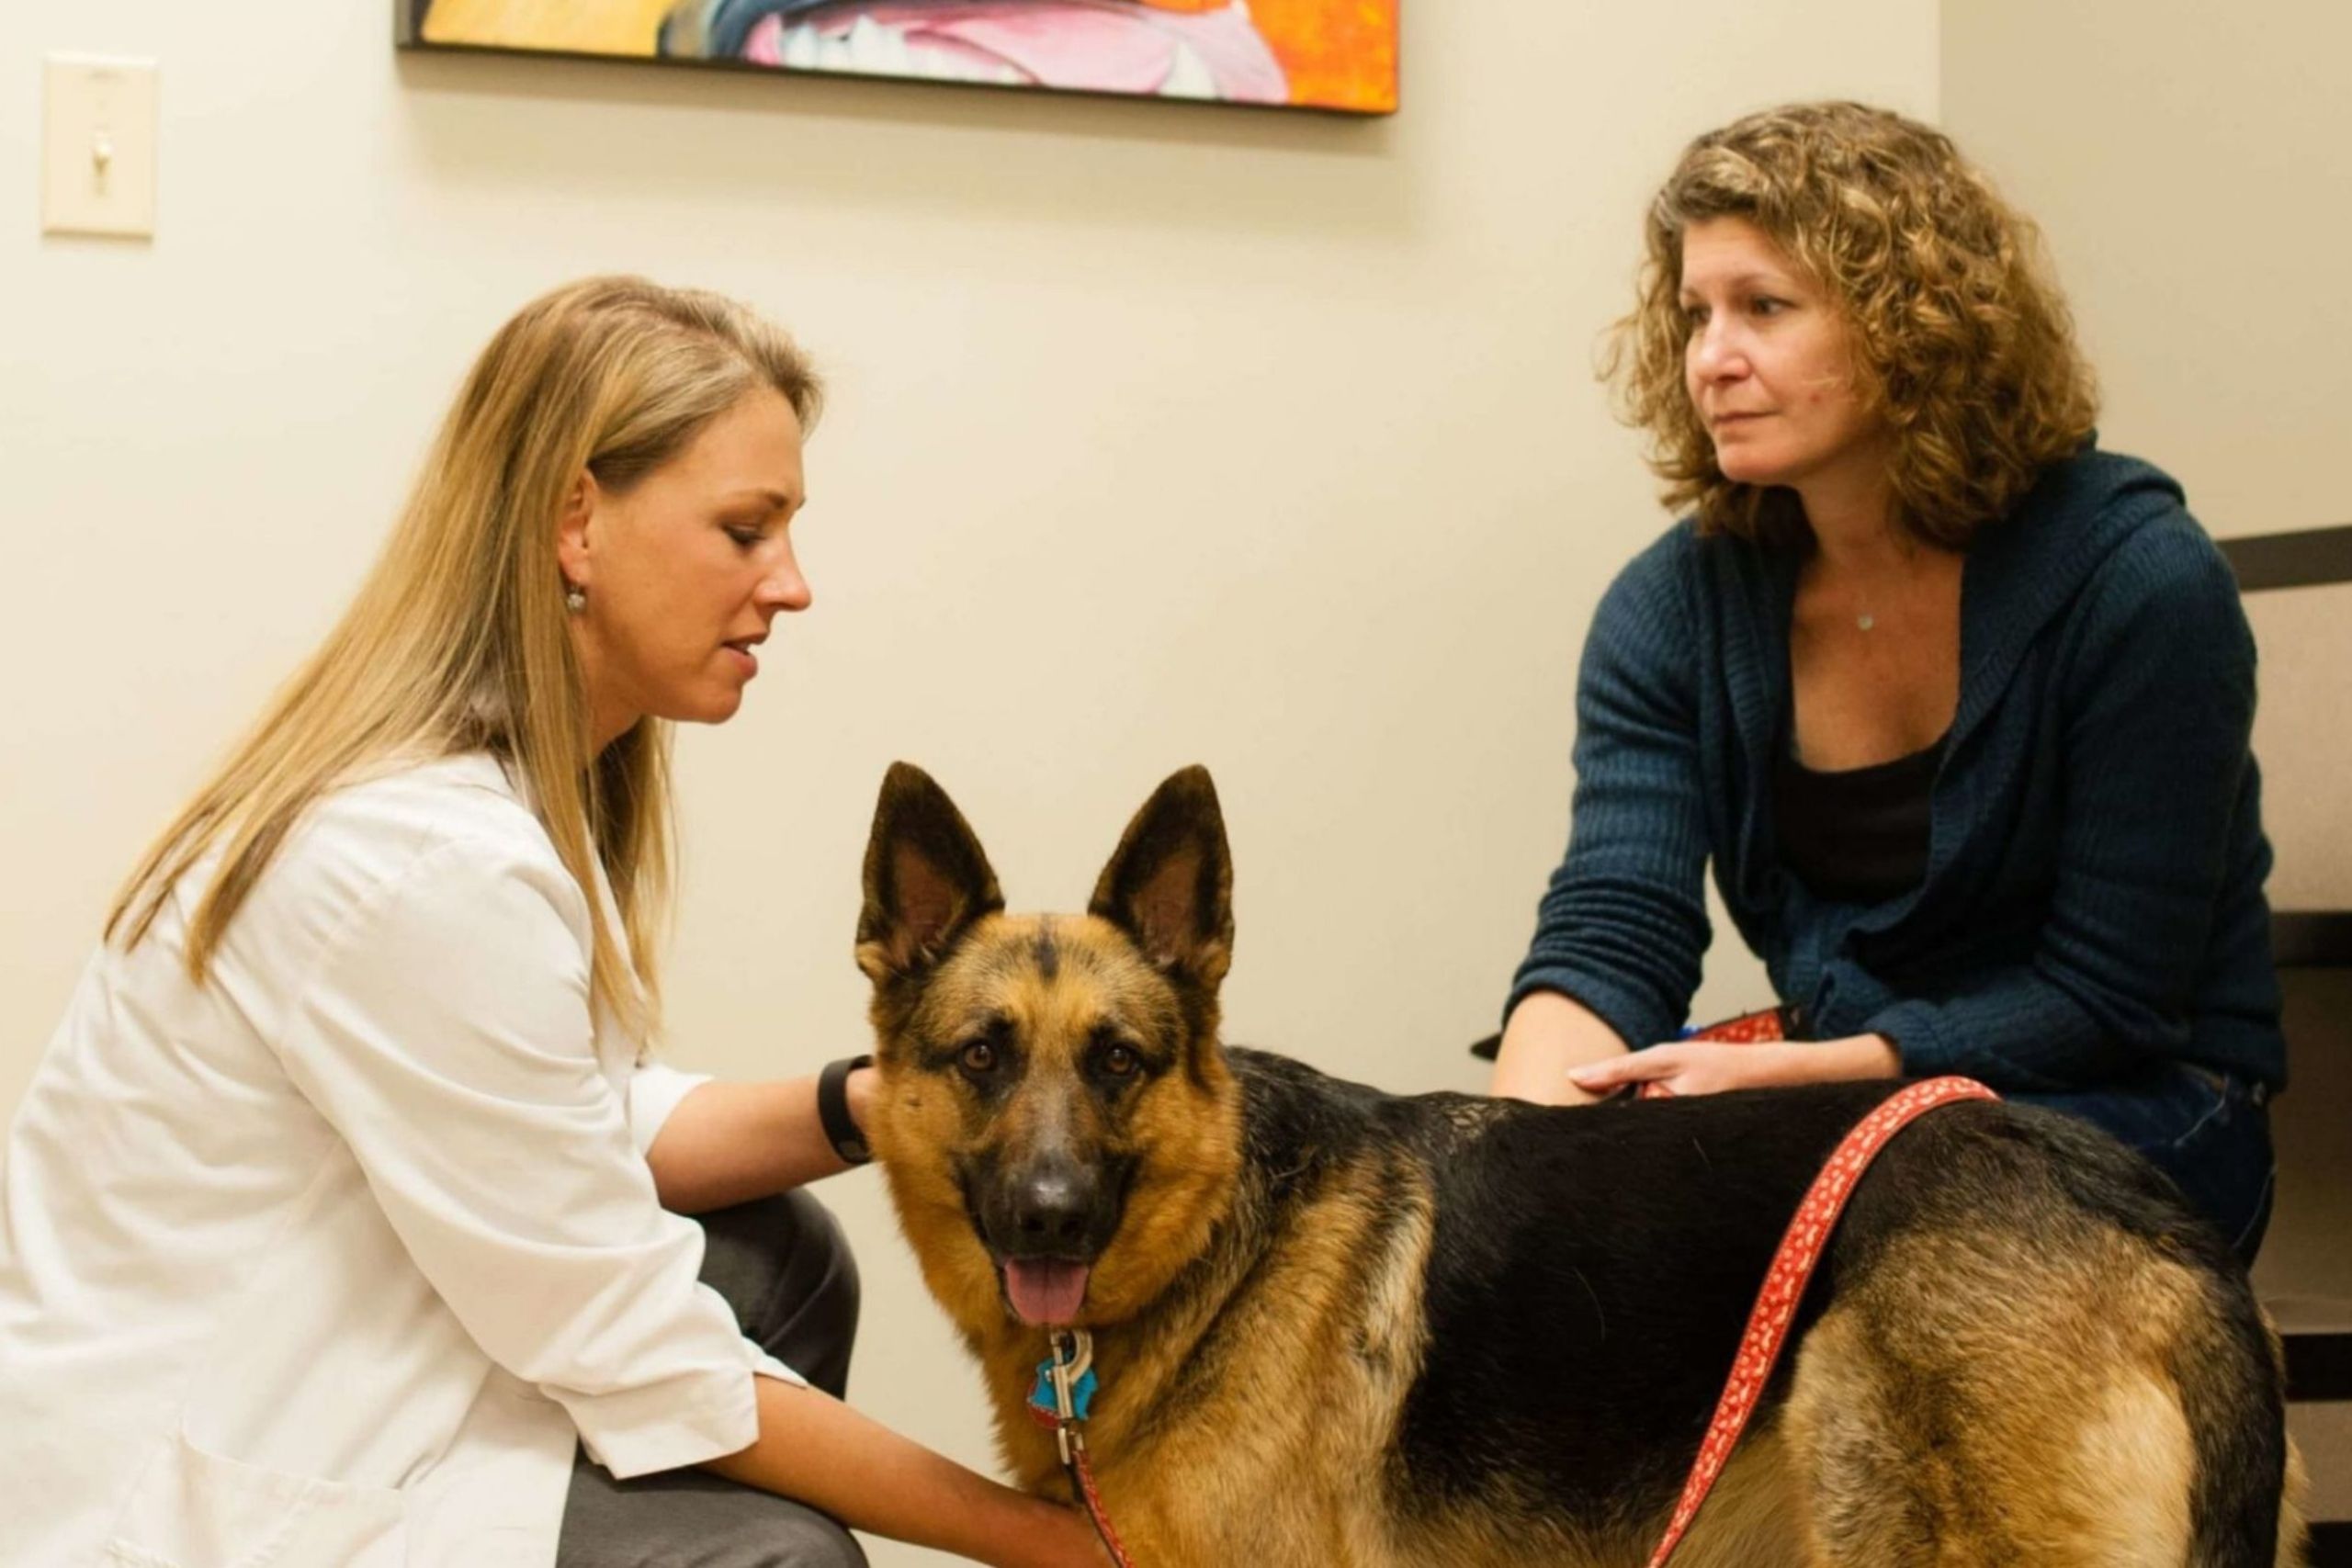 Dr Mozisek with client and dog